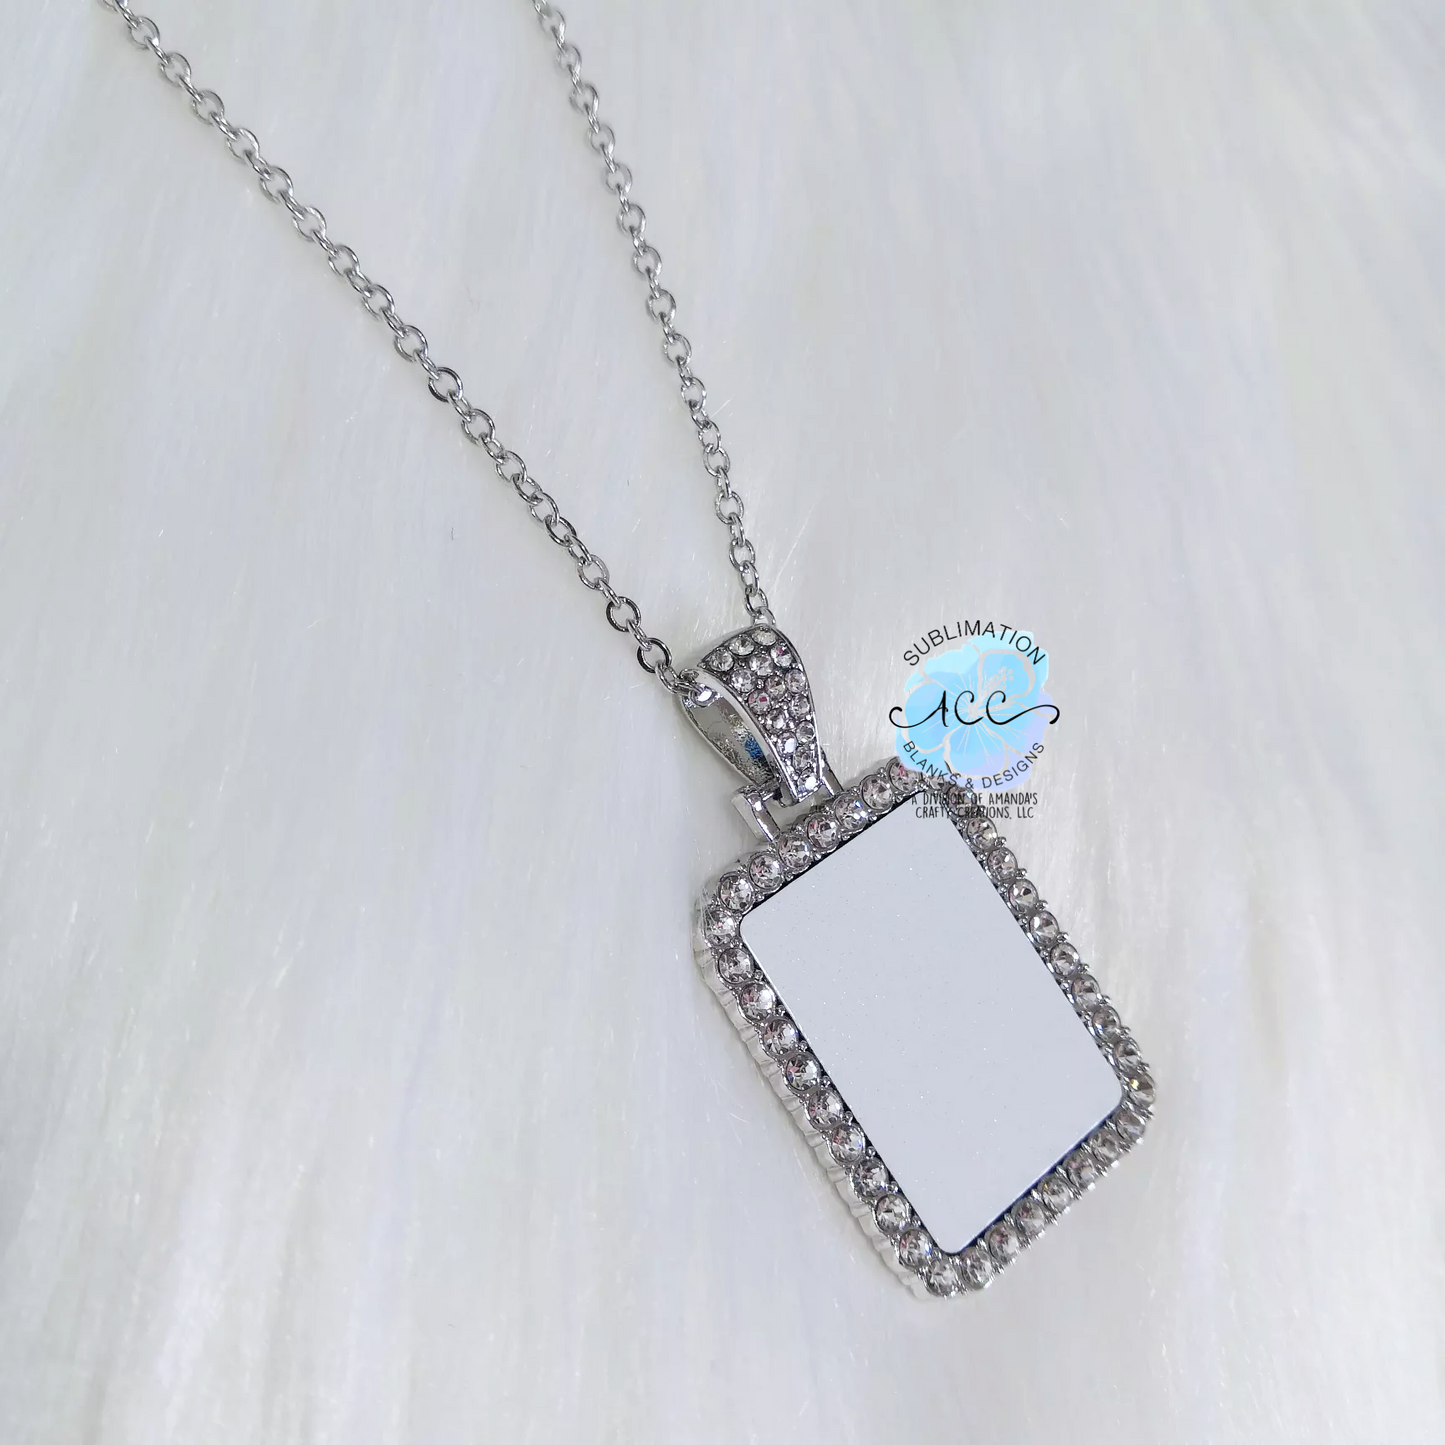 Sublimation blank necklace, circle necklace, rectangle necklace, double sided necklace blank, sublimation blank necklace RTS